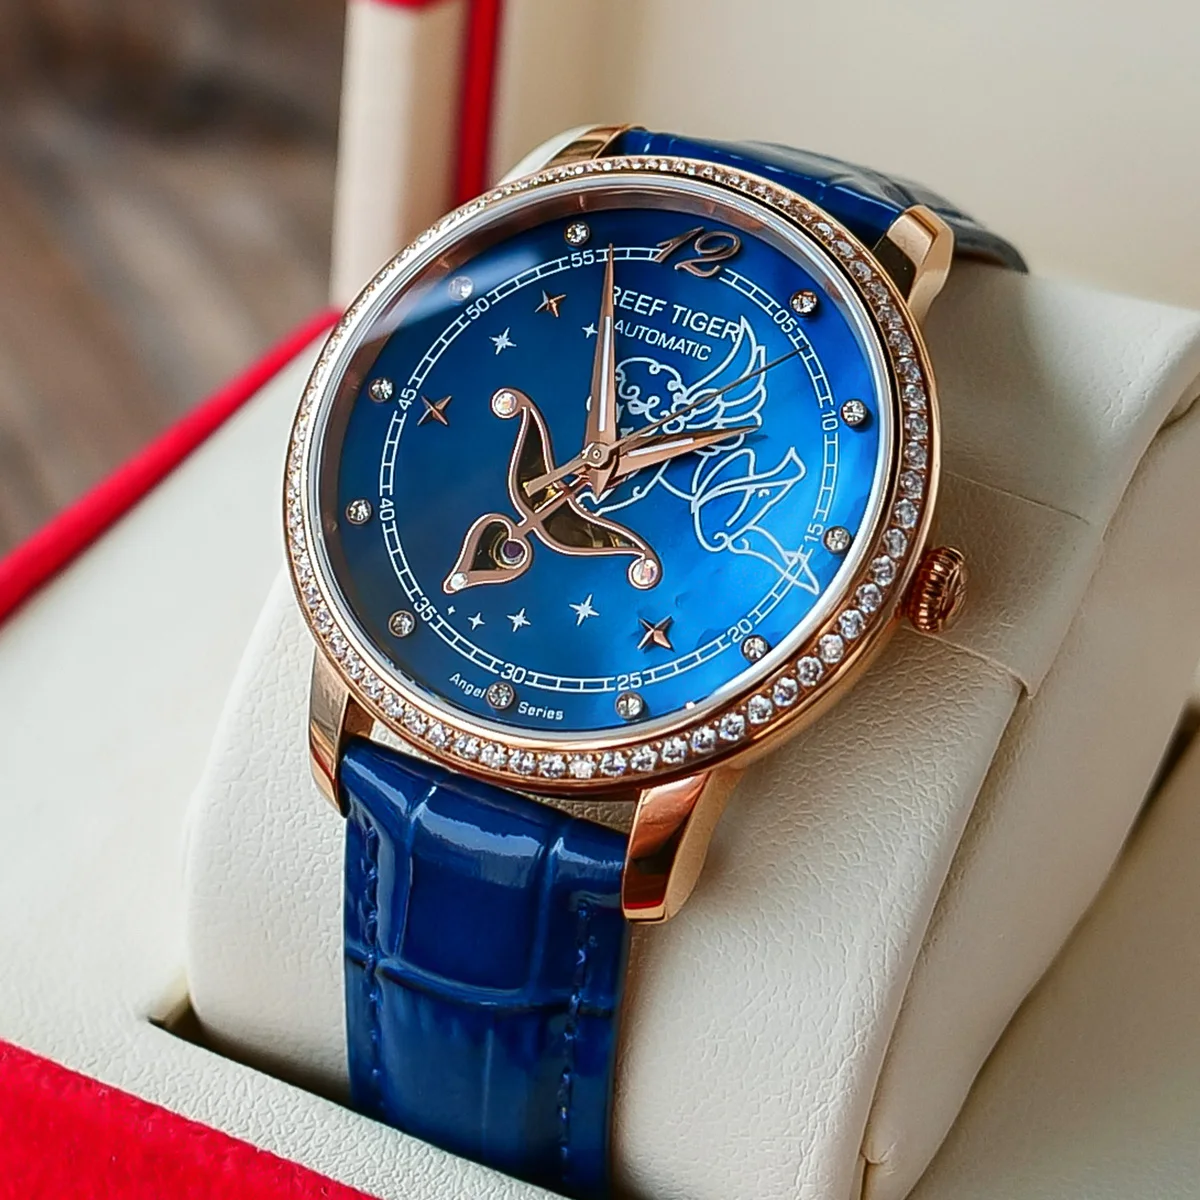 Reef Tiger/RT Blue Dial Watches for Women Diamonds Automatic Watch Leather Band Rose Gold Fashion Watches RGA1550 enlarge